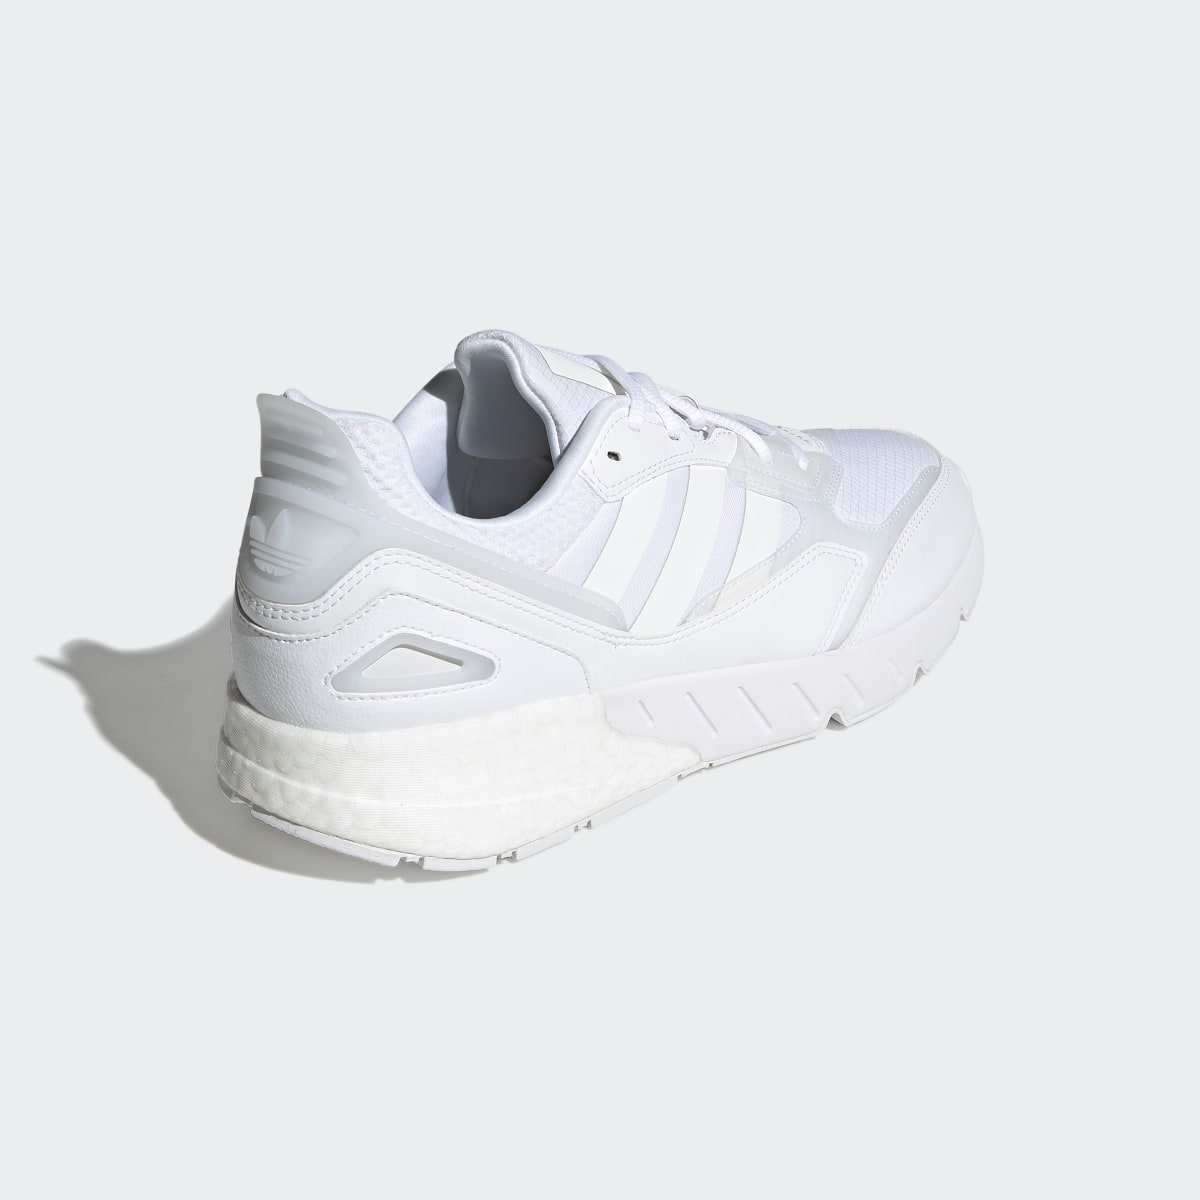 Adidas ZX 1K Boost 2.0 Shoes. 6